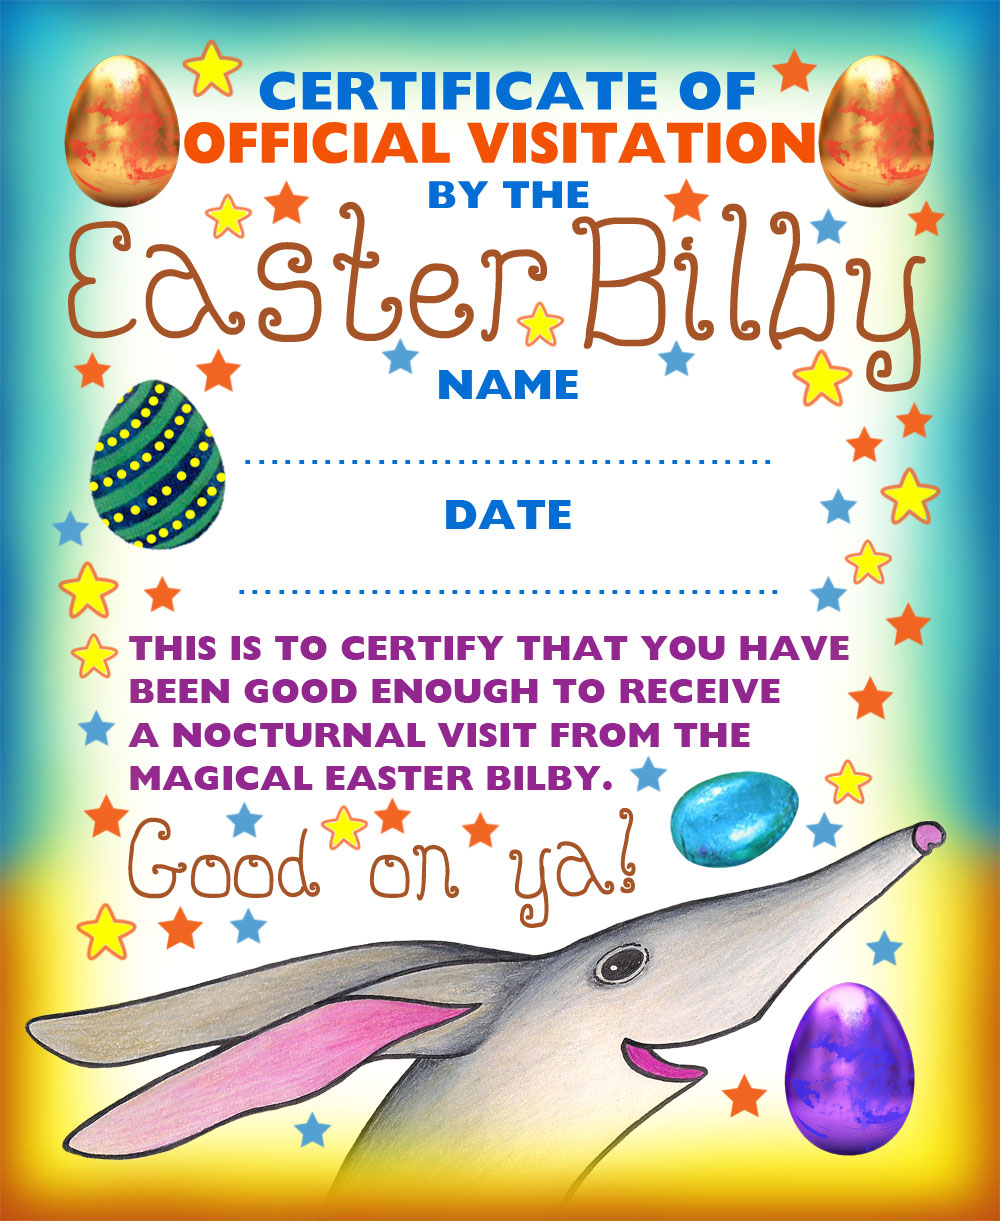 A certificate of official visitation from the Easter Bilby